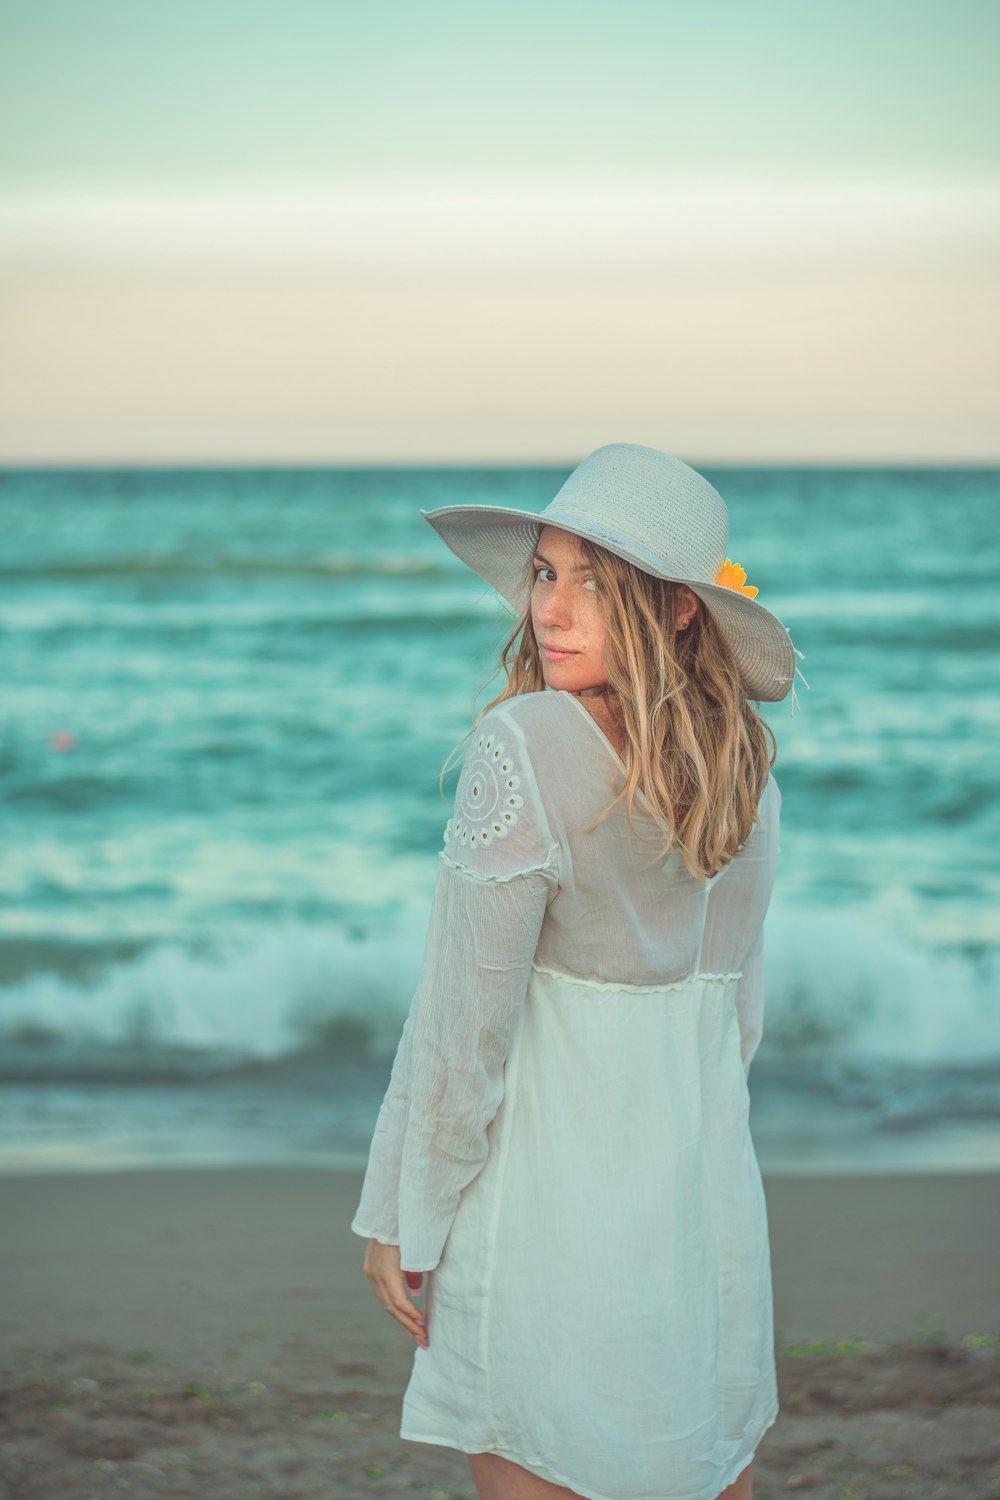 woman in white dress wearing brown hat standing on seashore during daytime